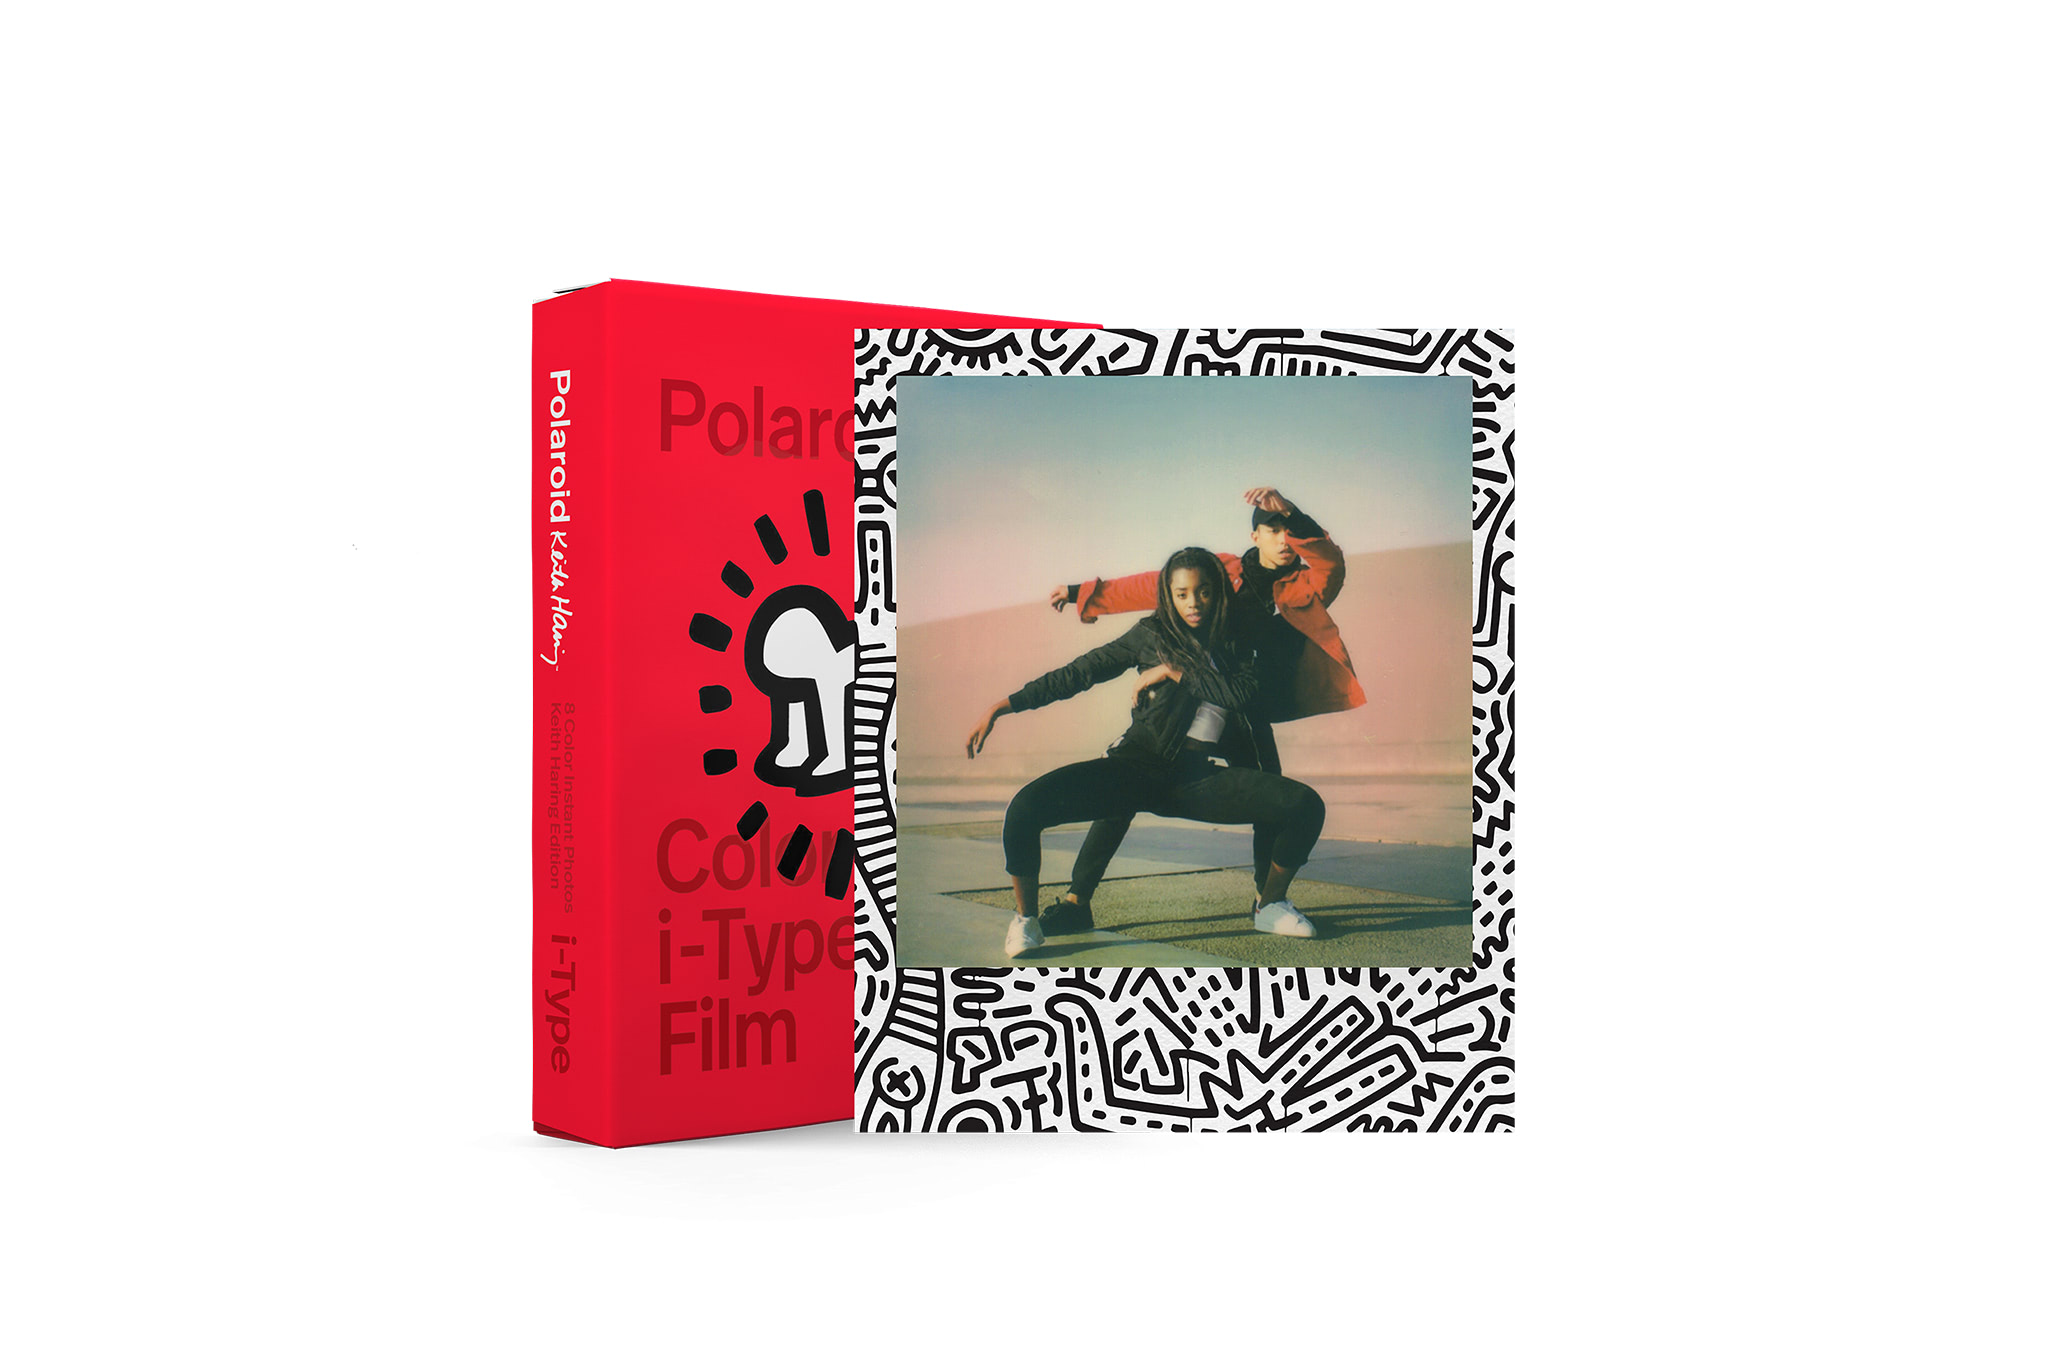 polaroid-color-i-type-film-keith-haring-edition